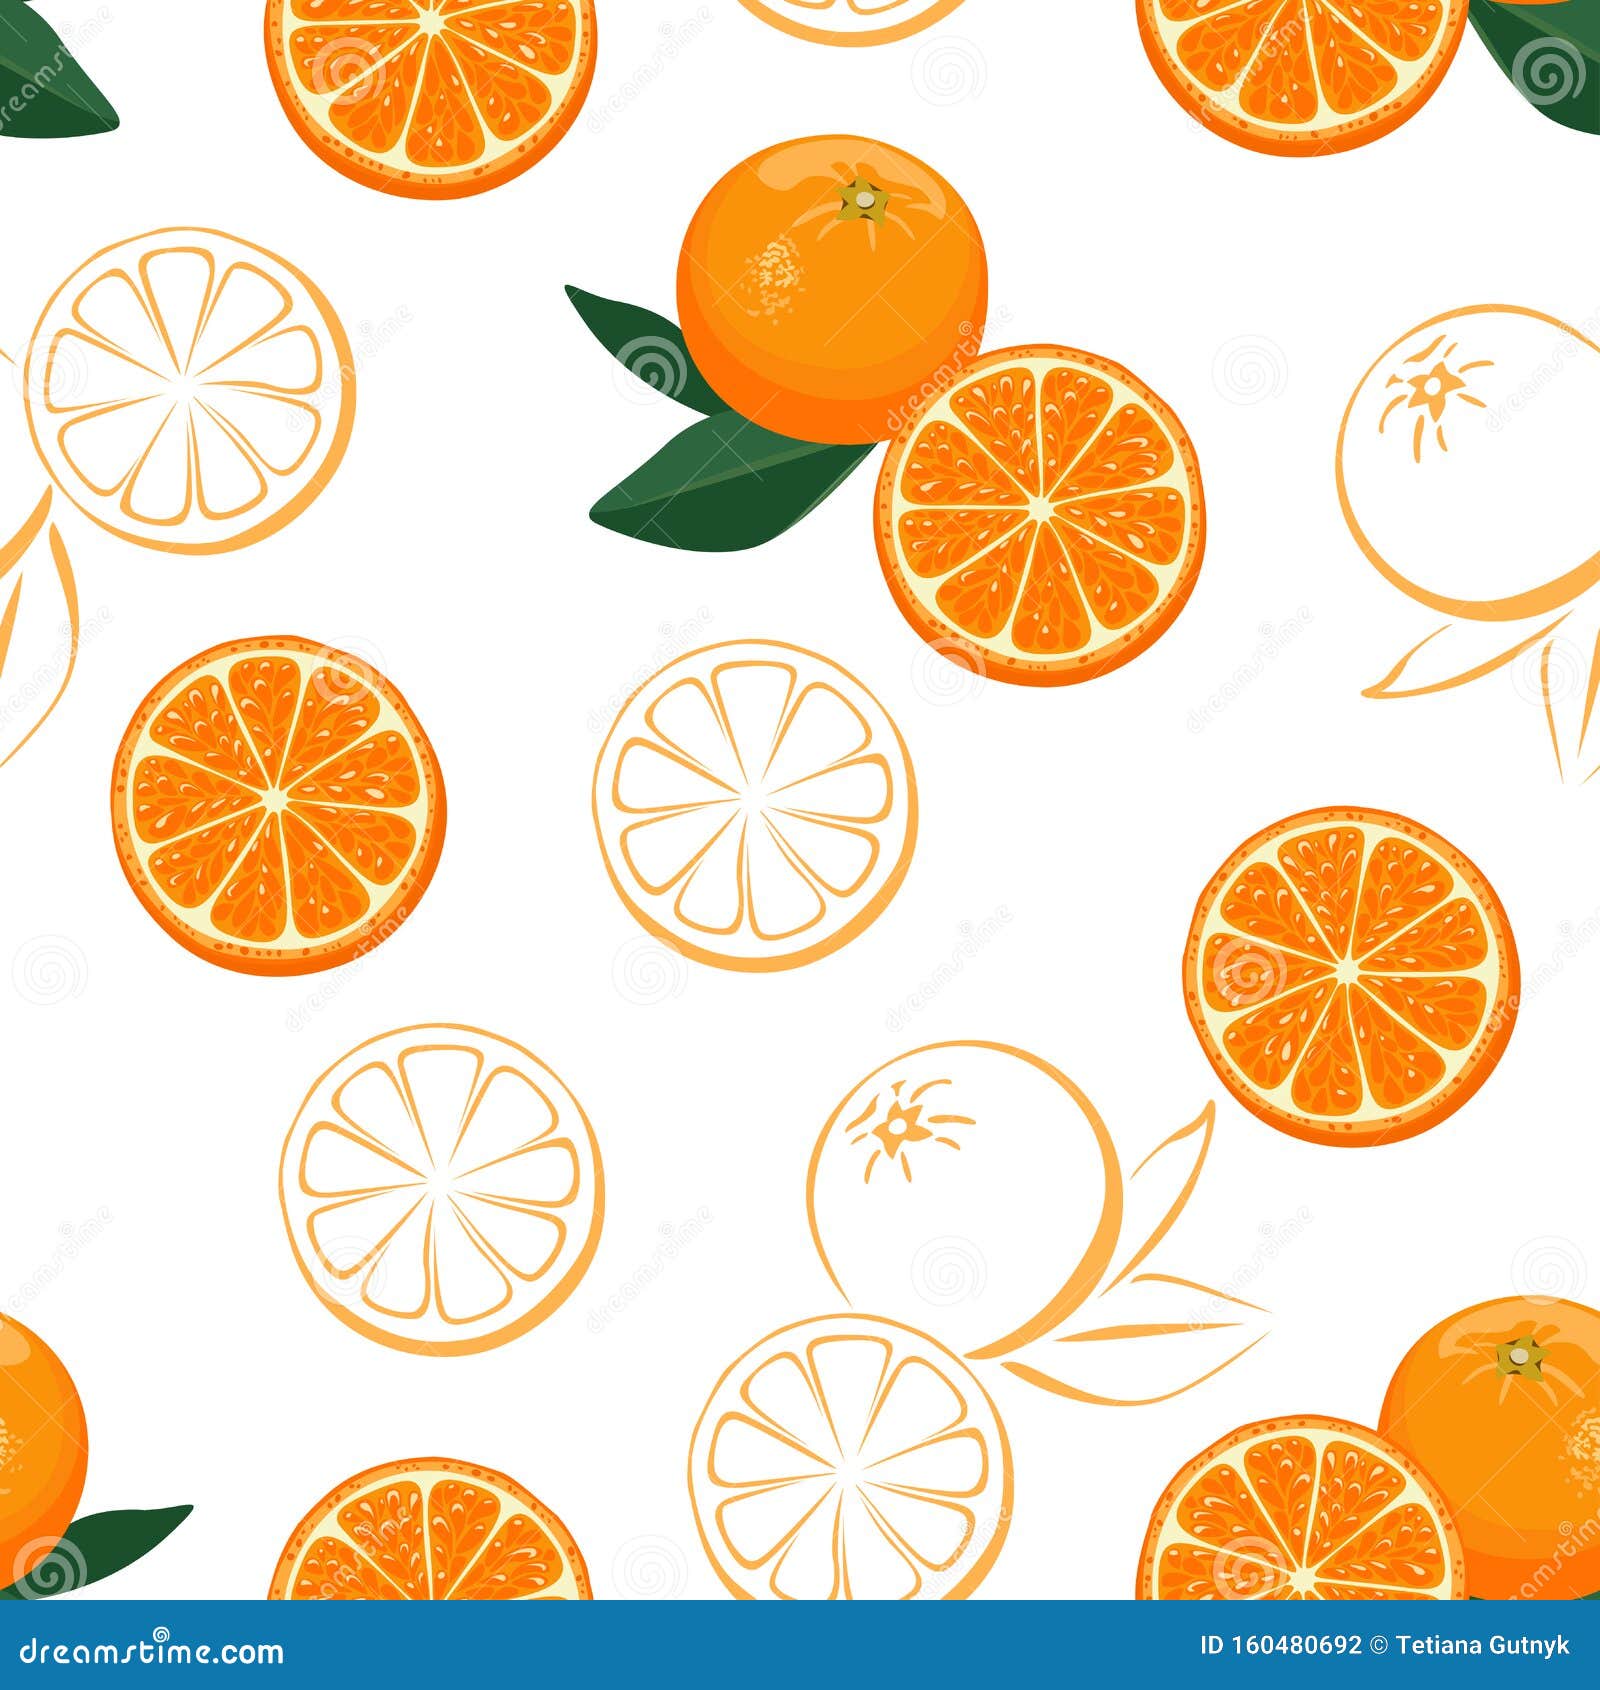 Oranges Fruits Seamless Pattern On A White Background Vector